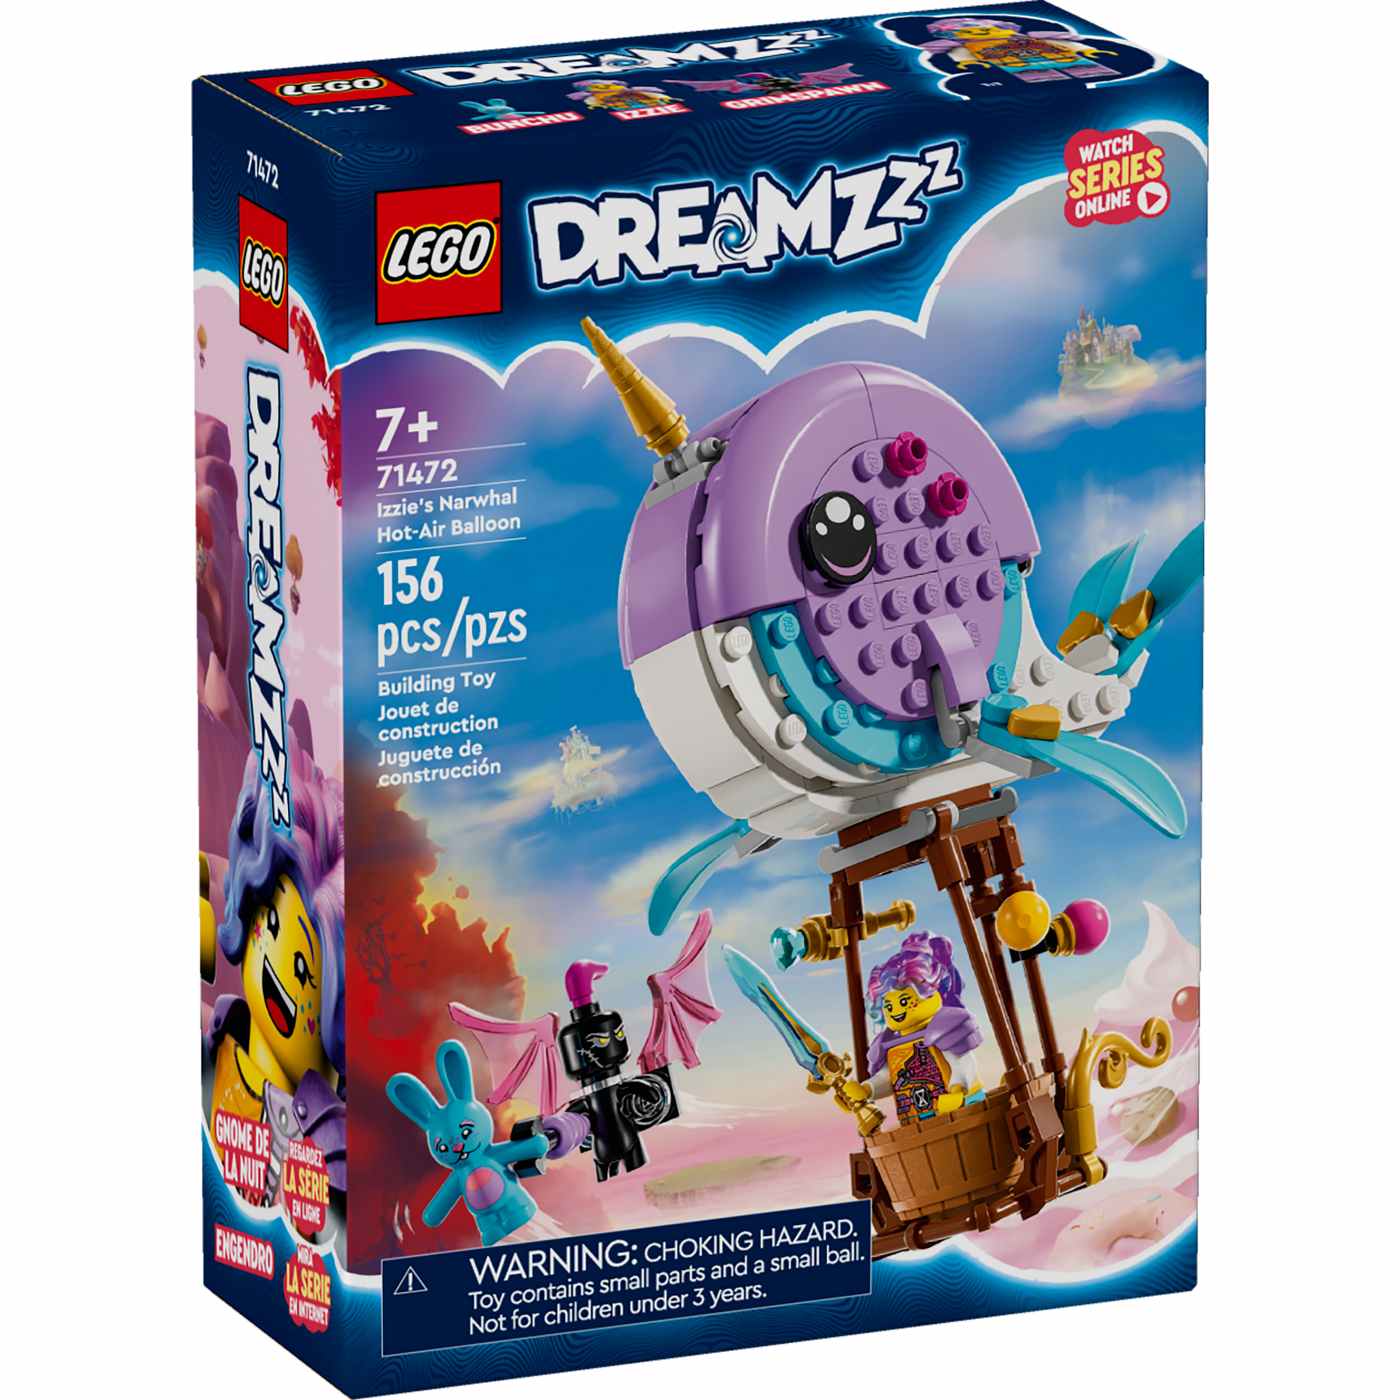 LEGO DREAMZzz Izzie's Narwhal Hot-Air Balloon Set; image 1 of 2